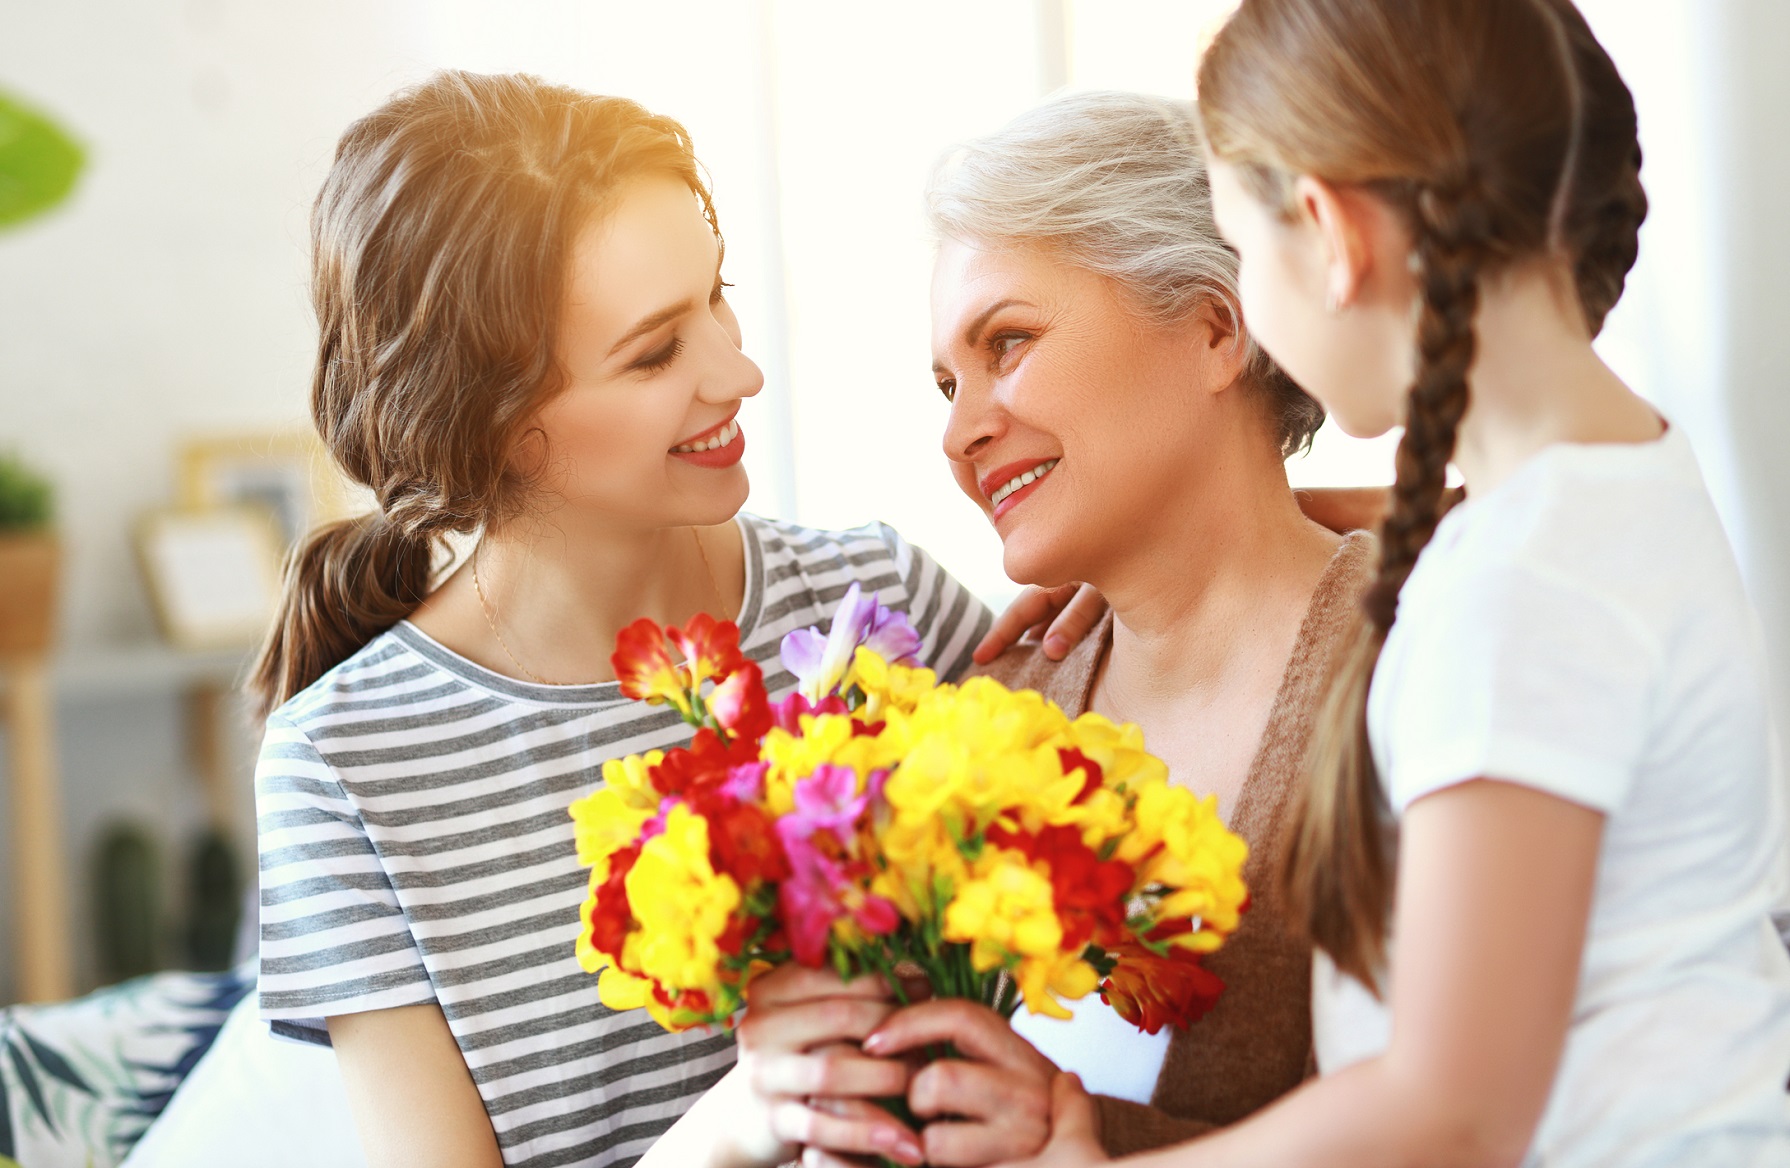 How To Pamper Mothers On Mother’s Day 2021